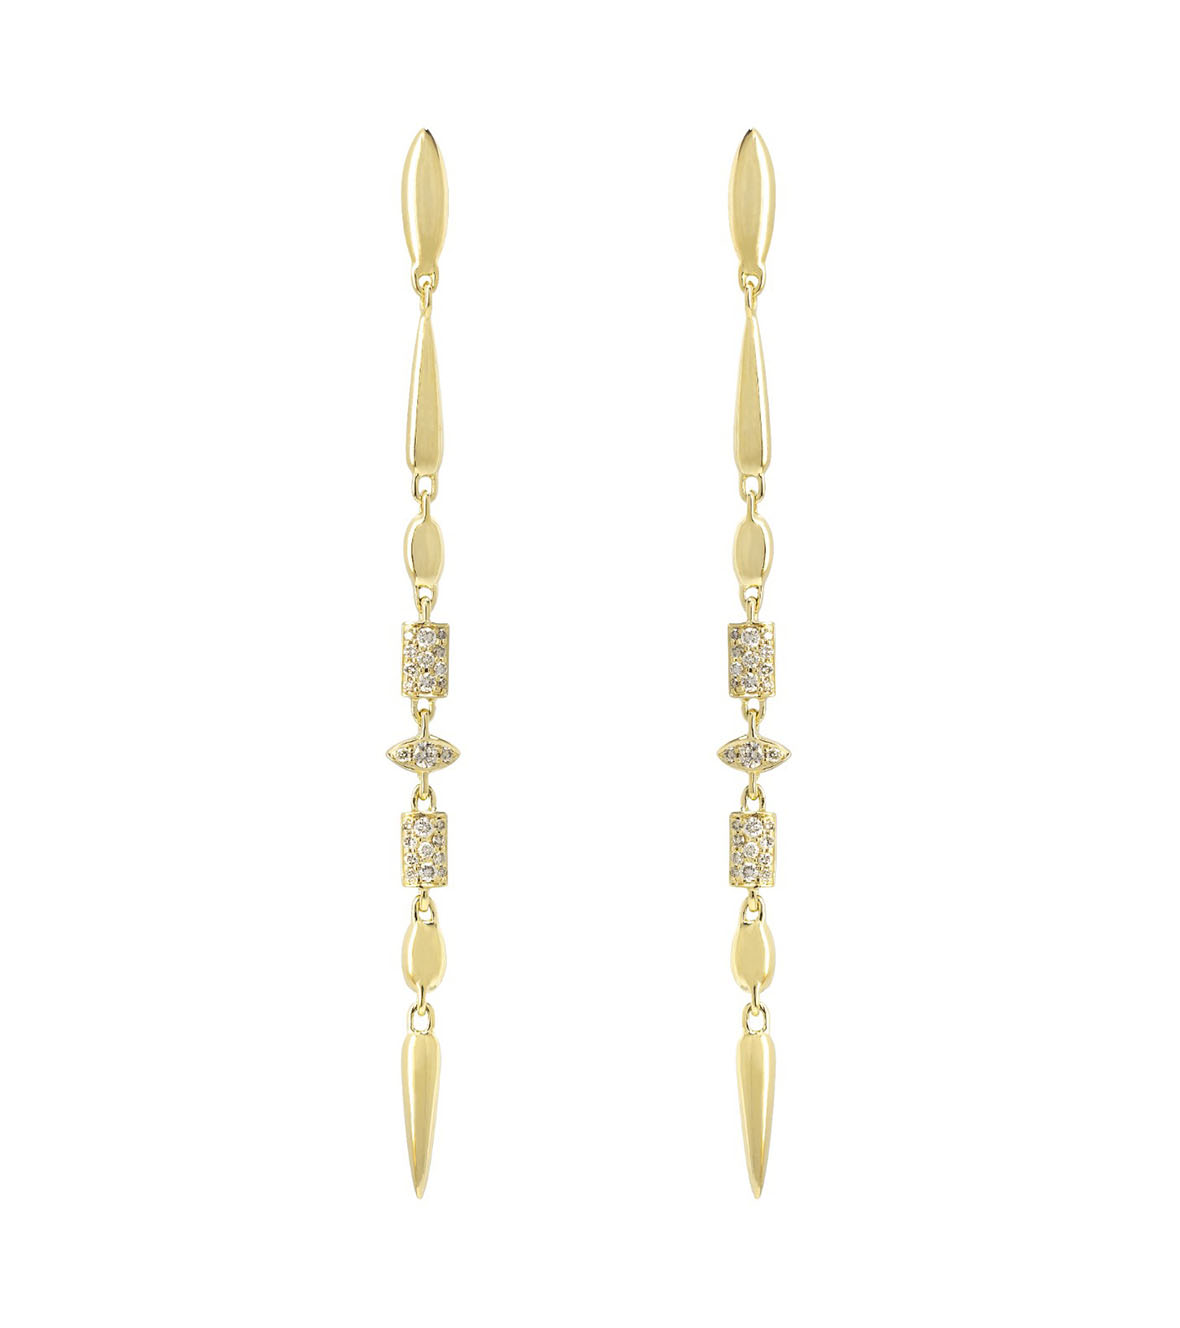 Yellow Gold Earrings with Diamonds 3651 by Etho Maria